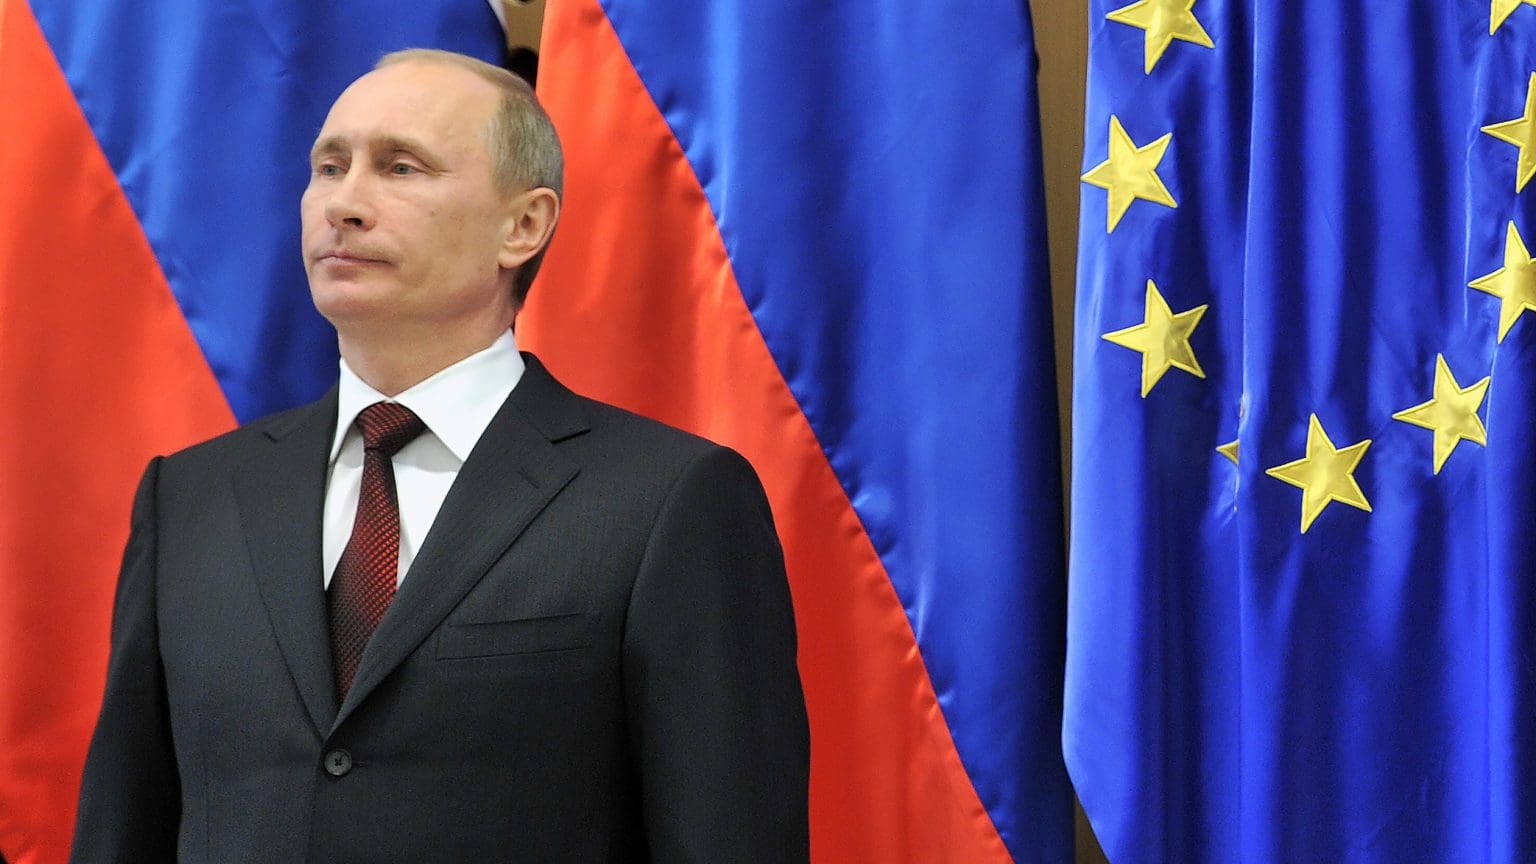 EU Sanctions: It Weakens Europe in the Short-Term; Russia Could Crumble in the Long Run